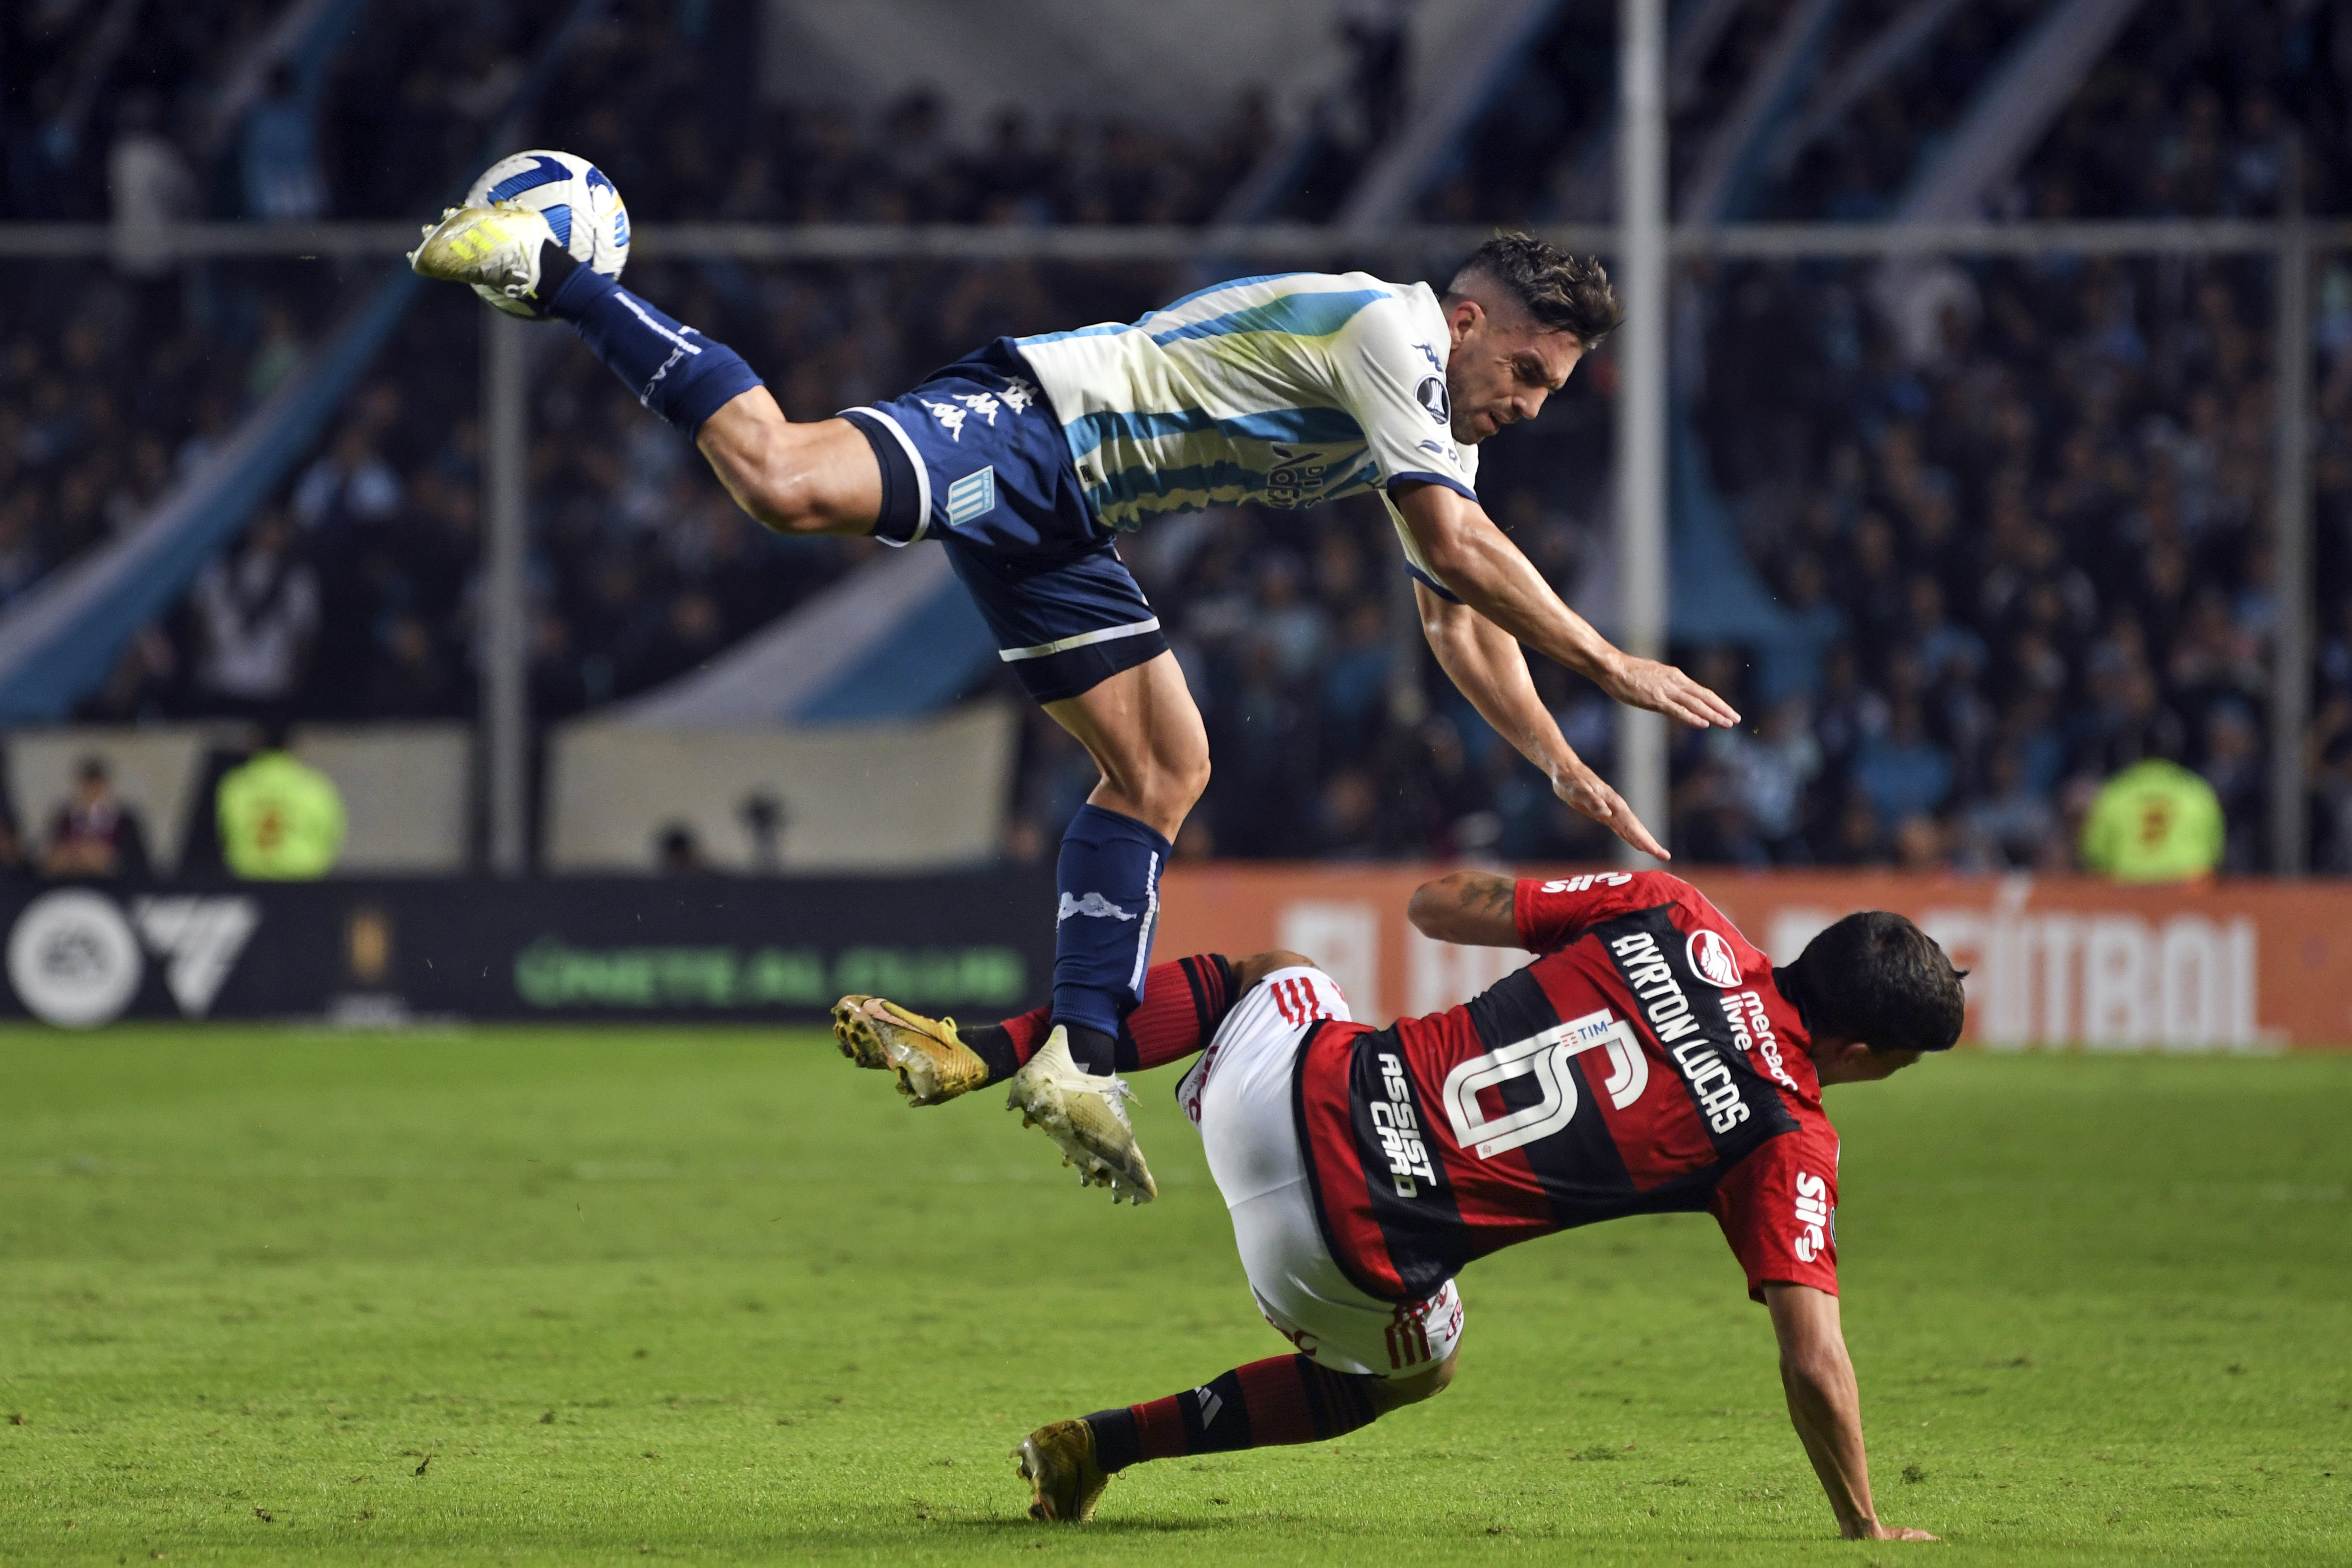 Ayrton Lucas (right) of Brazil's Flamengo is fouled by Gabriel Hauche of Racing Club de Argentina during a Copa Libertadores Group A match at the Presidente Perón stadium in Avellaneda, Argentina on May 4, 2023 (AP Photo/Gustavo Garello)